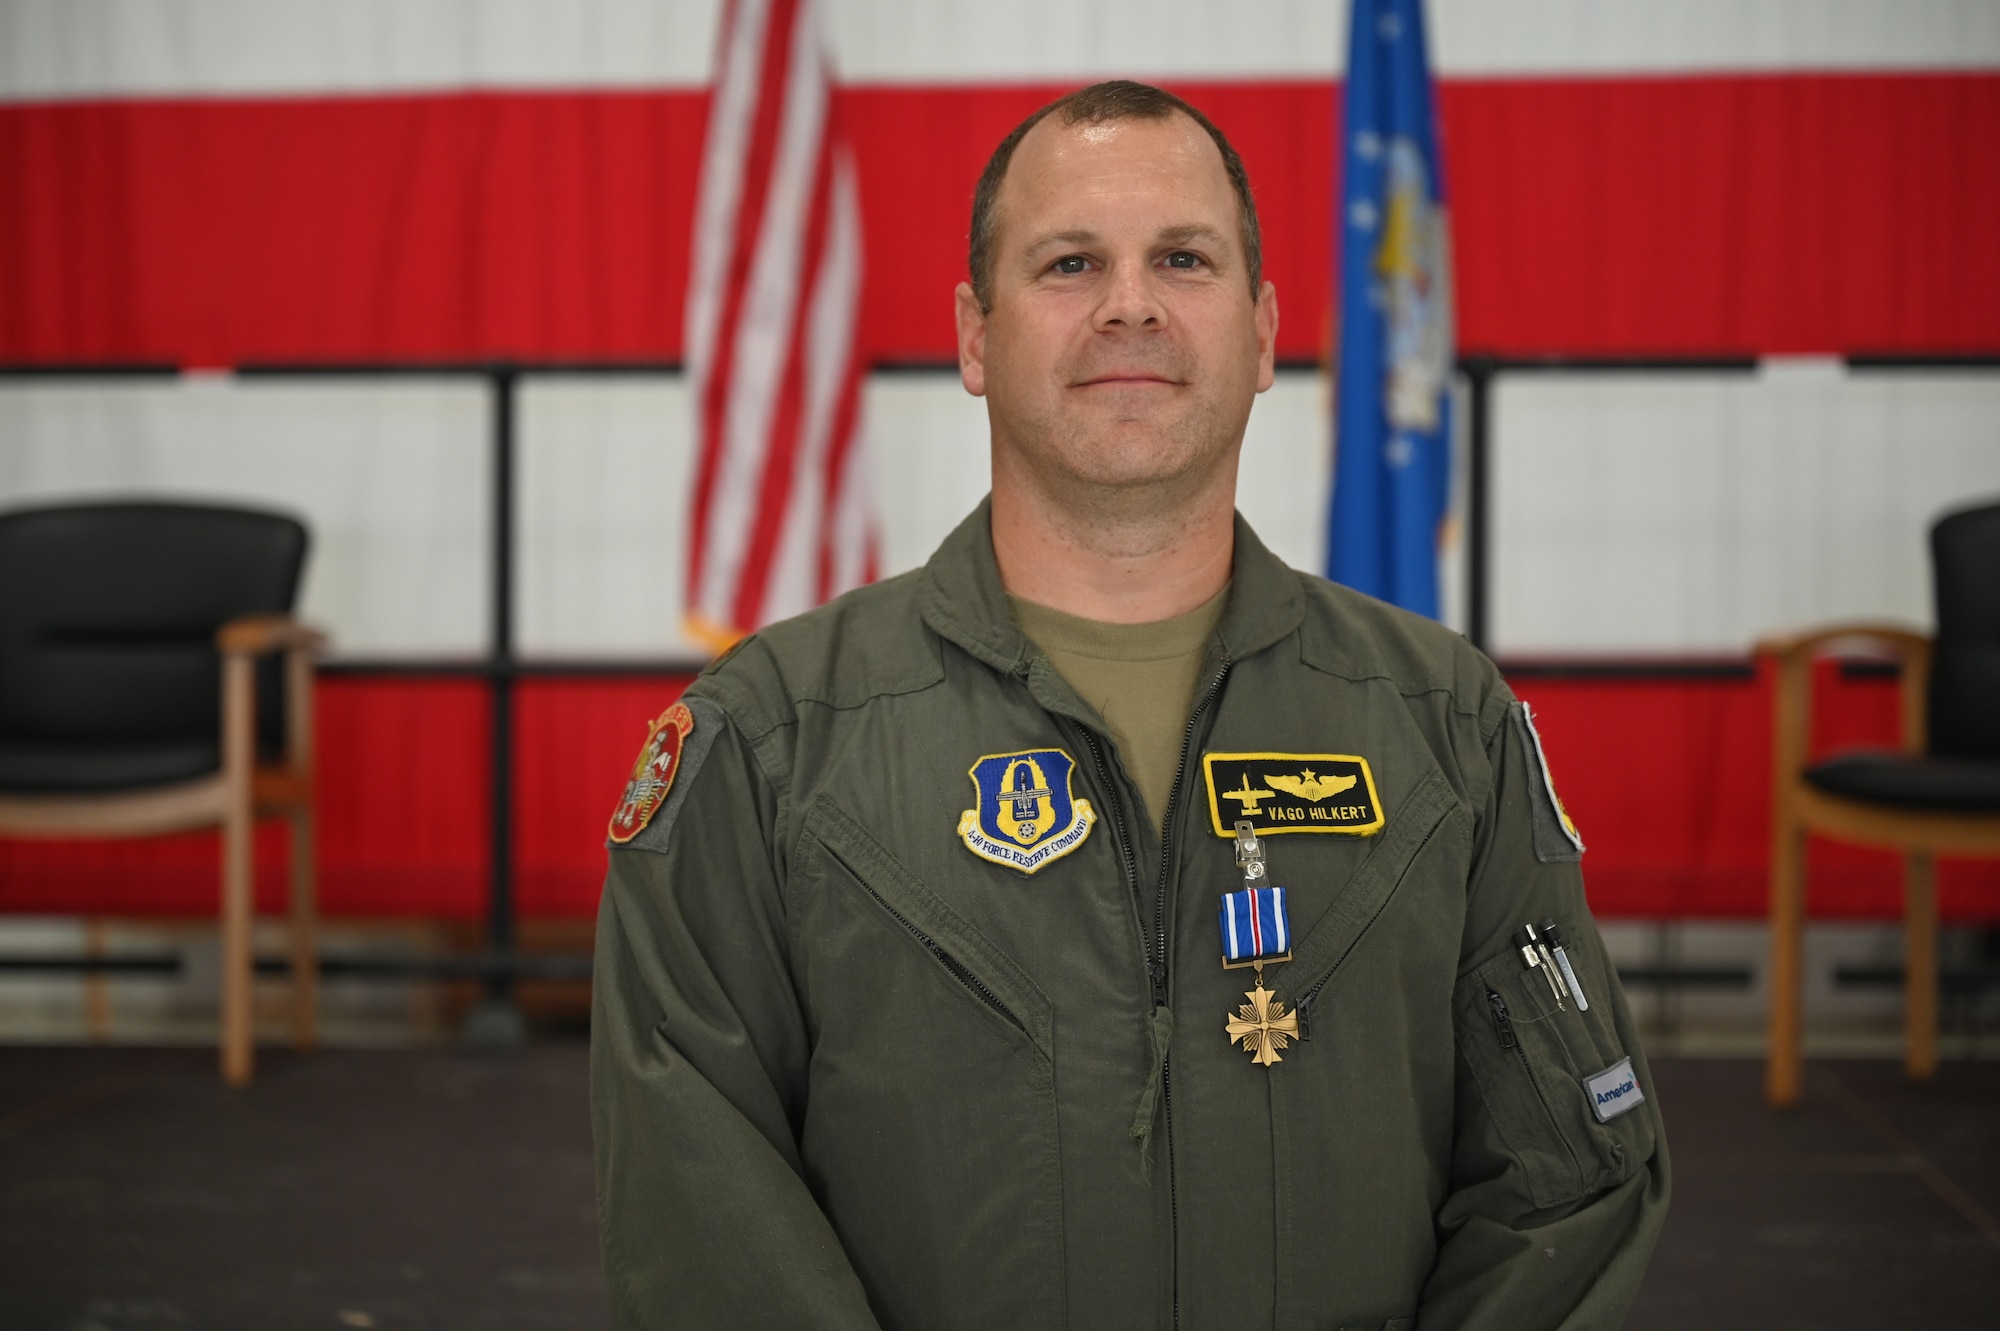 A man stands in front of a large American flag wearing green coveralls. The patch on his left breast reads "Vago Hilkert". A medal is clipped to his name patch.